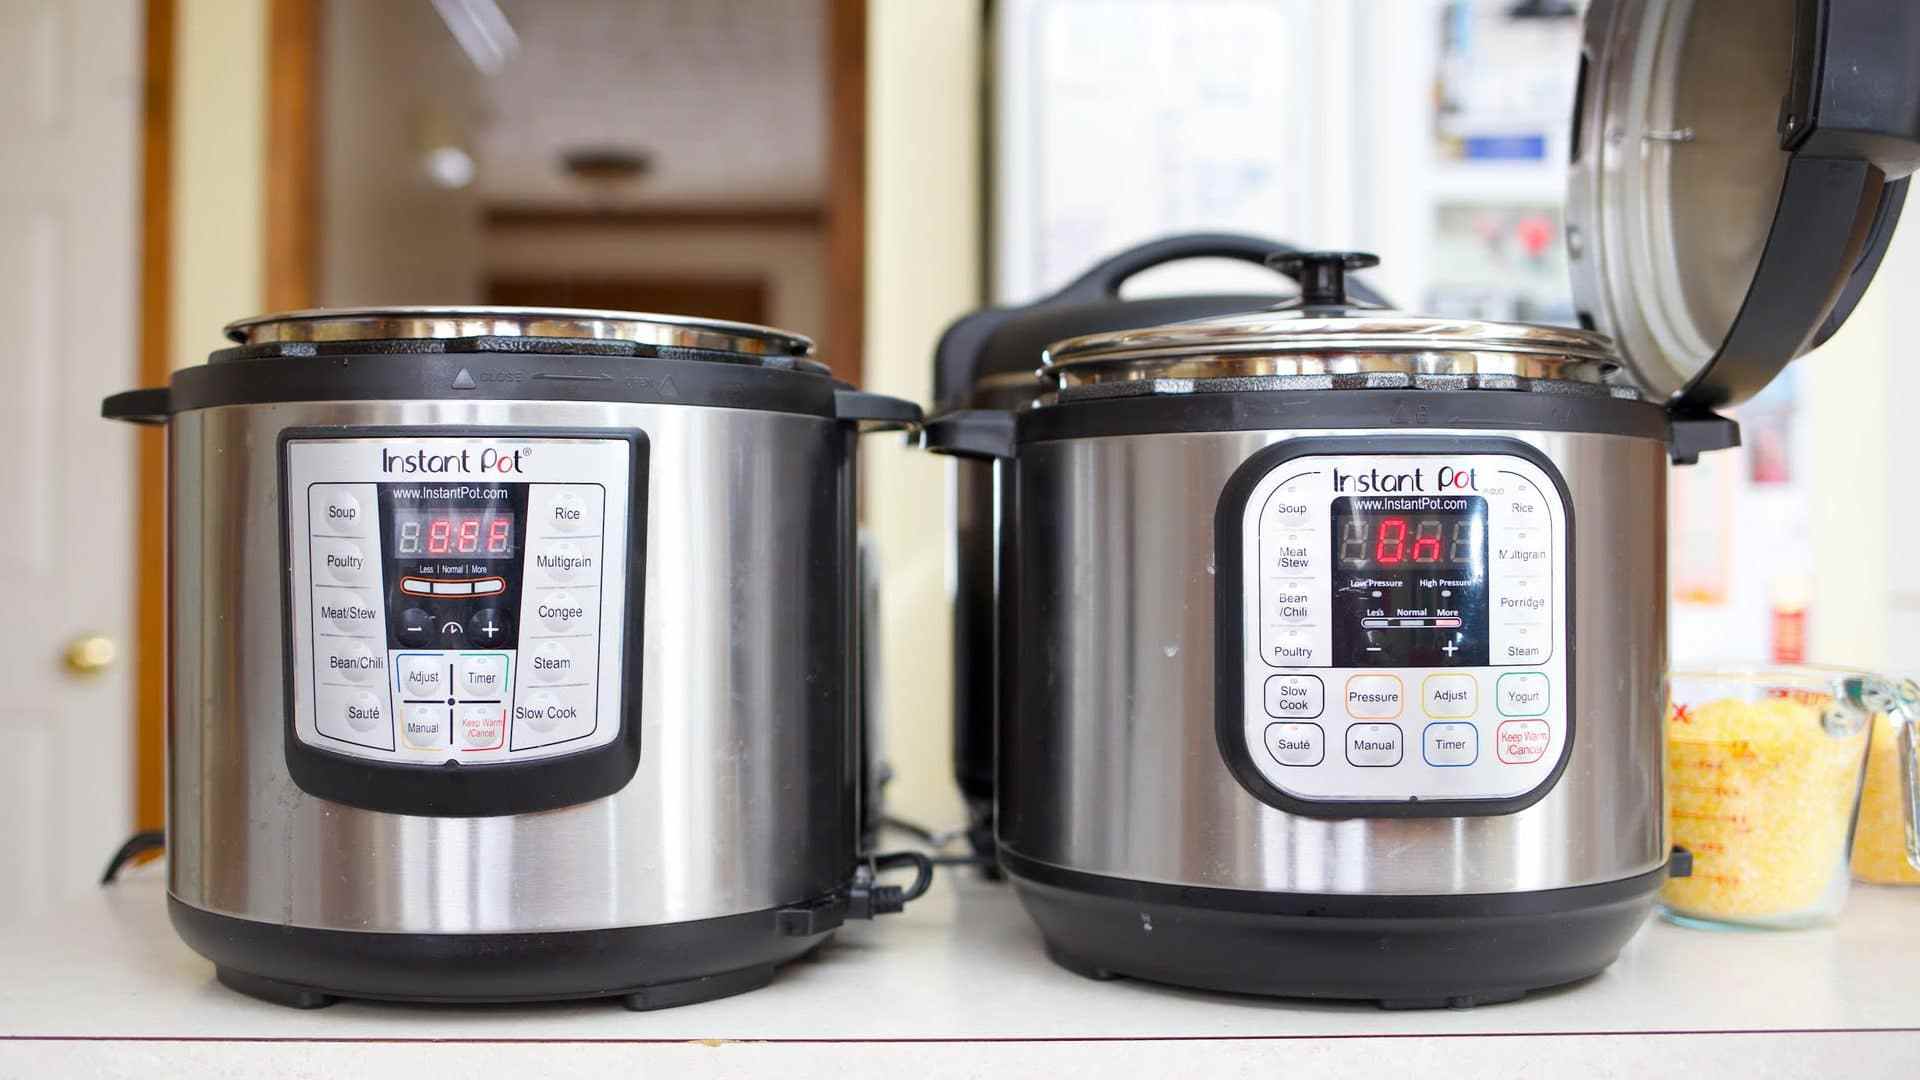 Featured image for “January is National Slow Cooking Month”